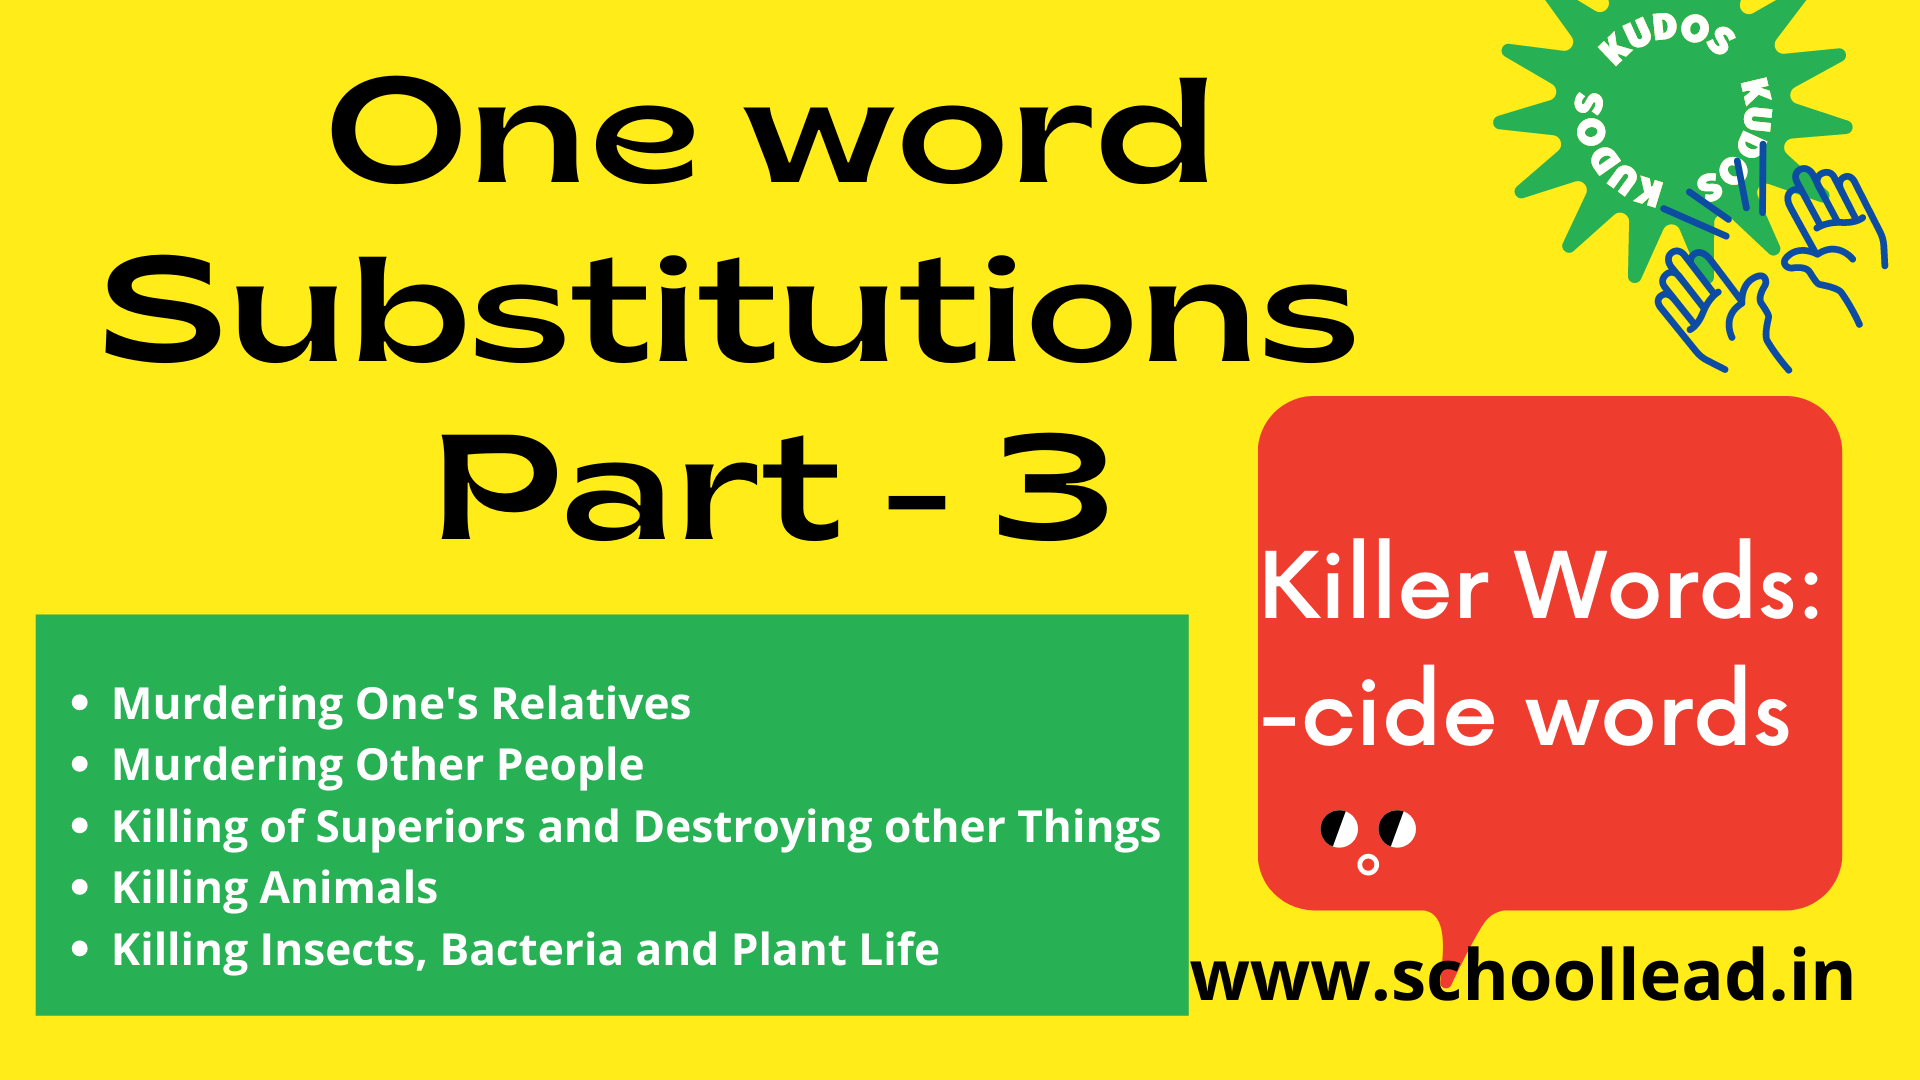 One Word Substitutions -cide words - English Vocabulary - School Lead